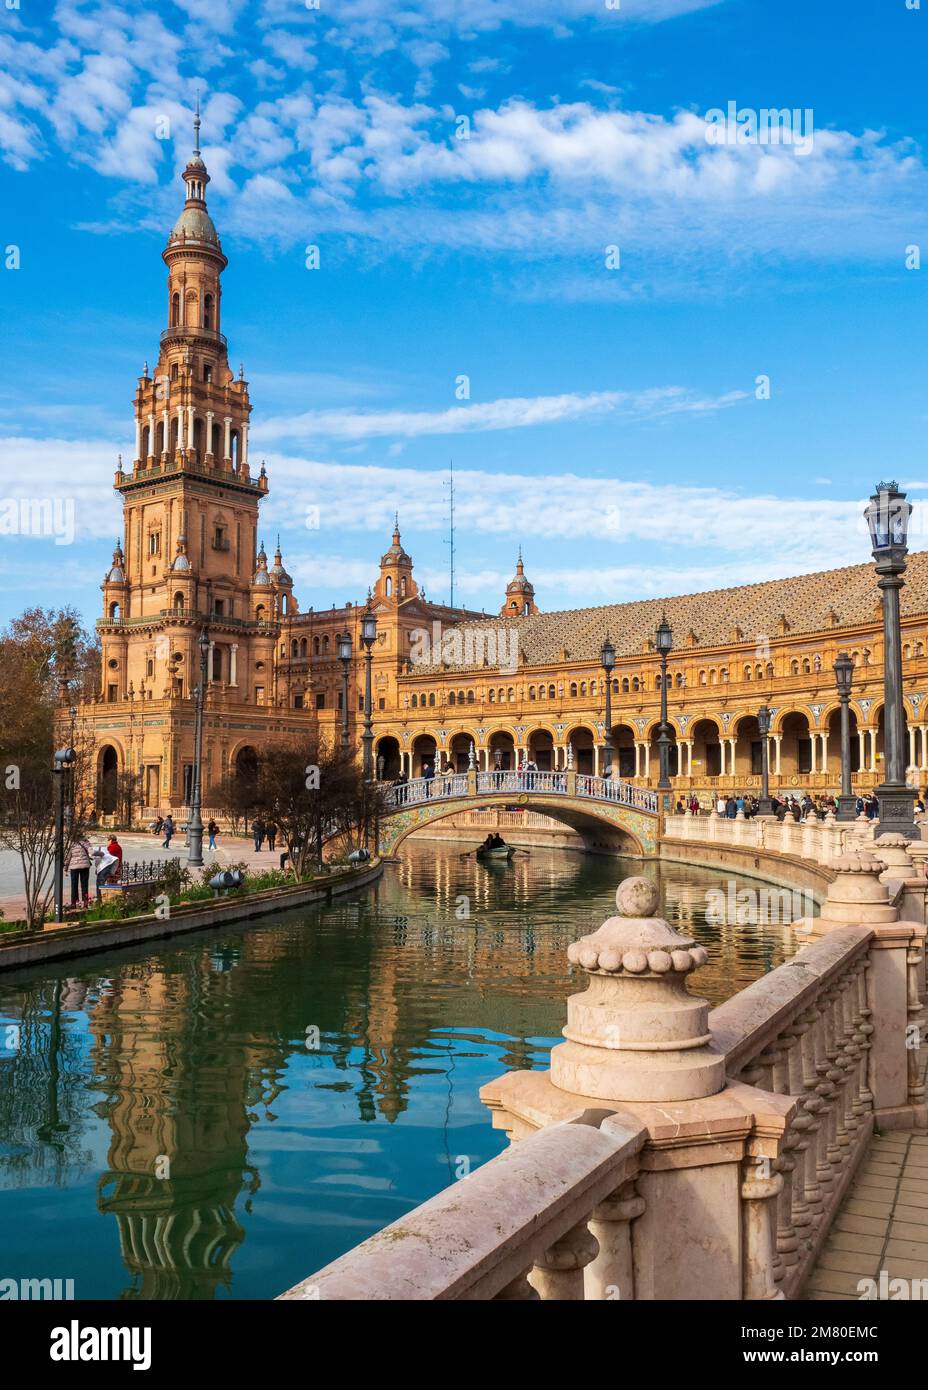 Towers and arches in the Plaza de España in Seville Stock Photo